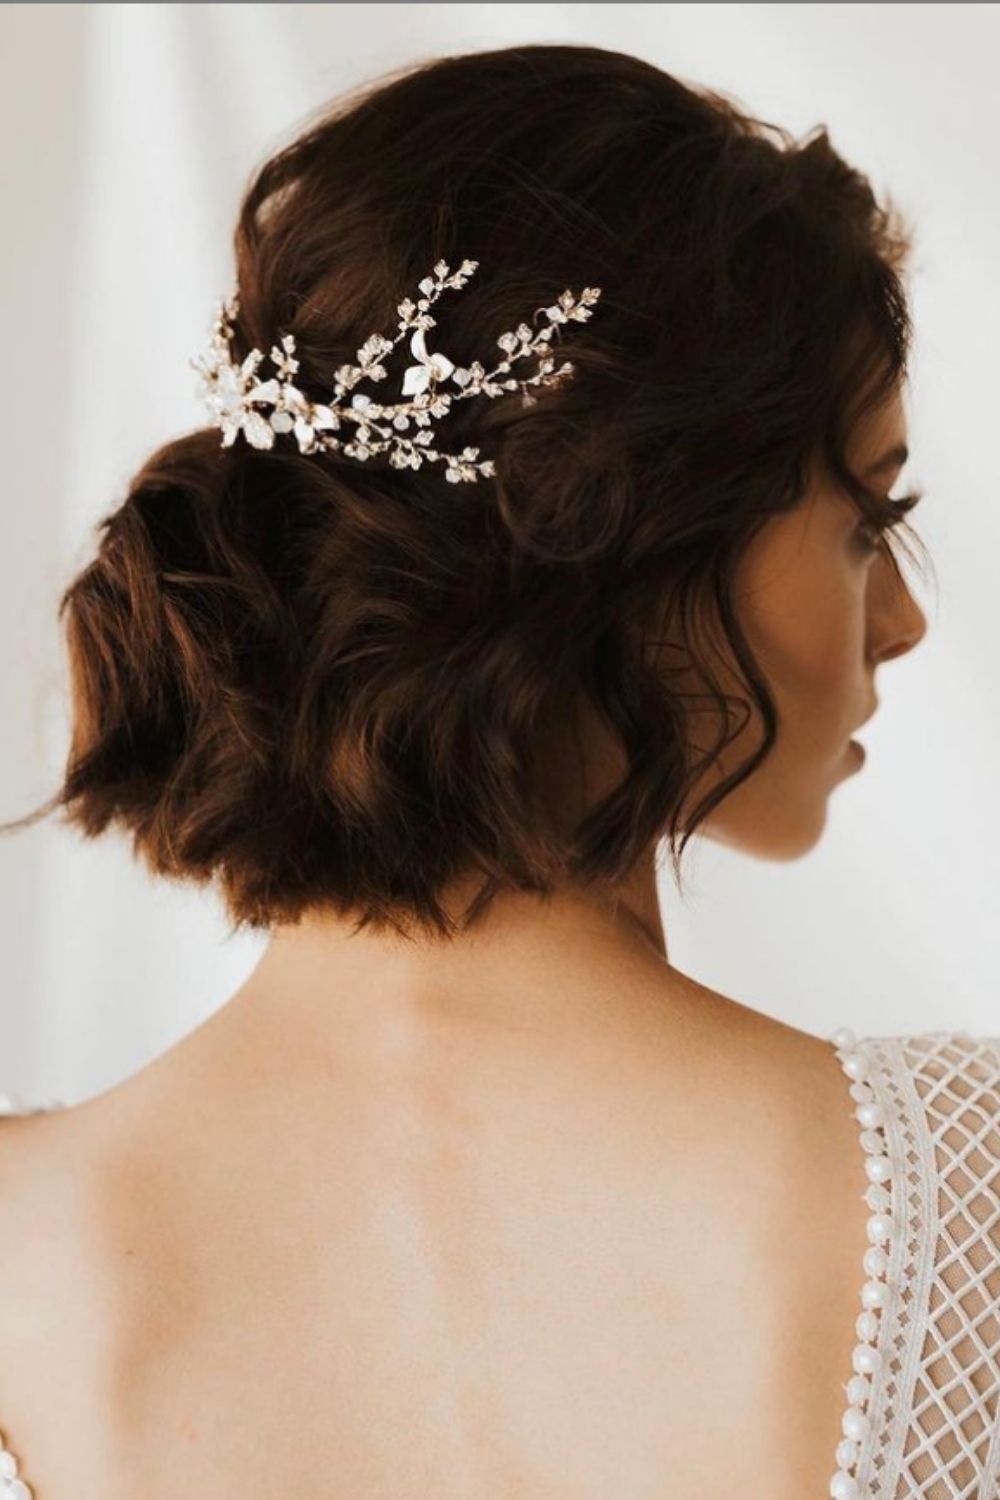 How to styles the wedding hairstyles for short hair